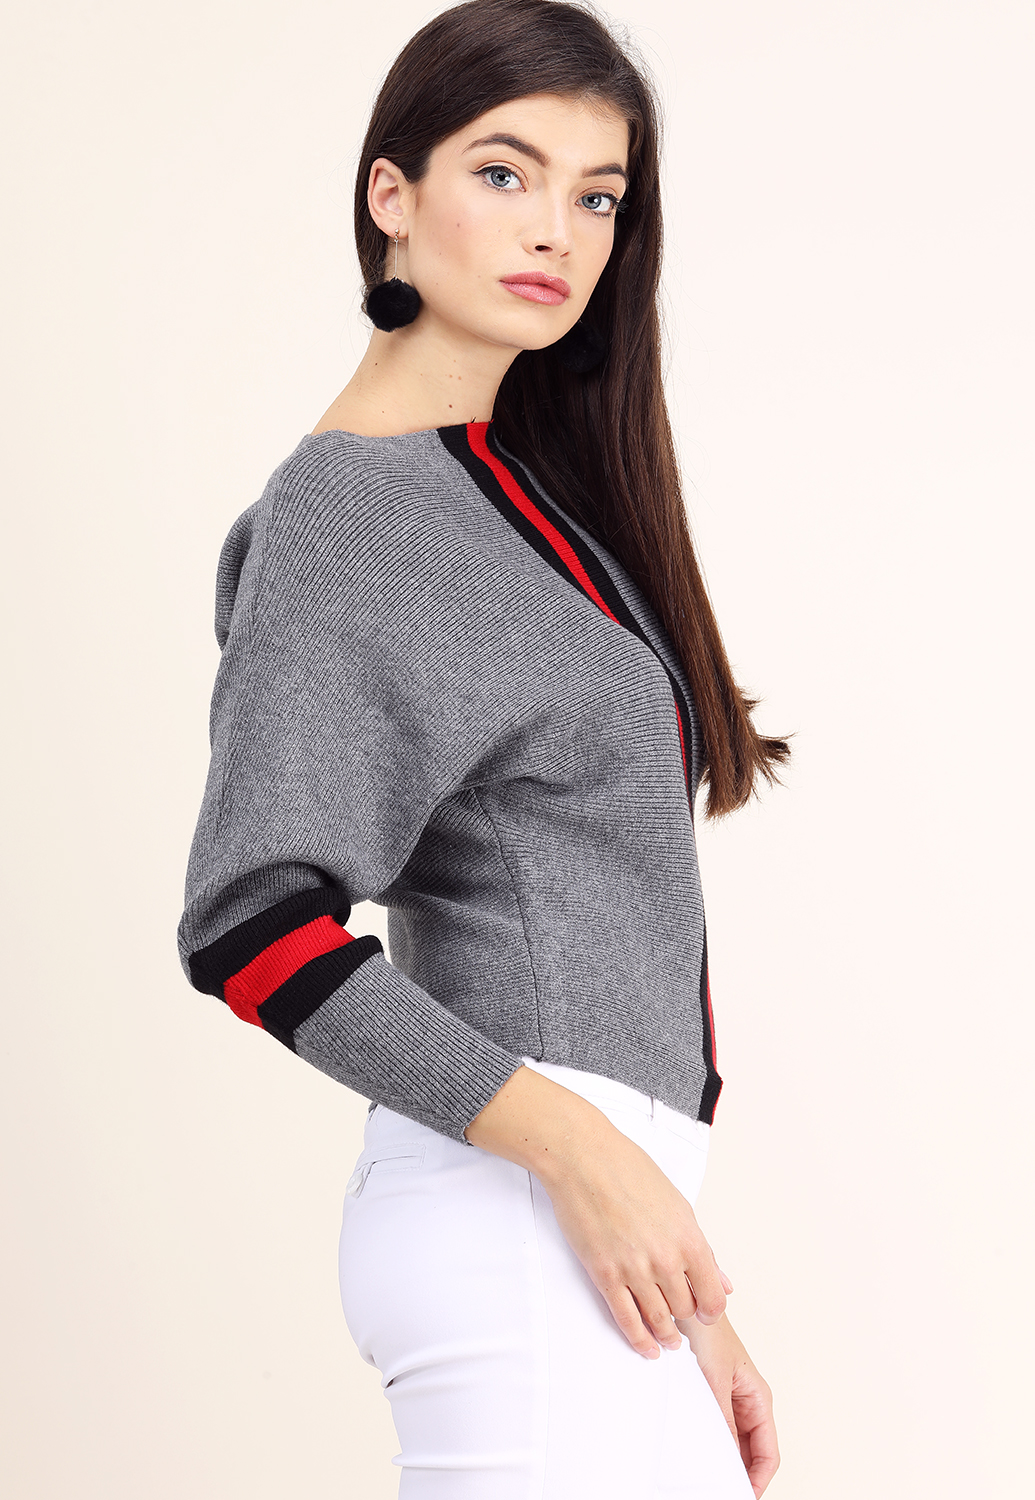 Colorblocked Knit Sweater 